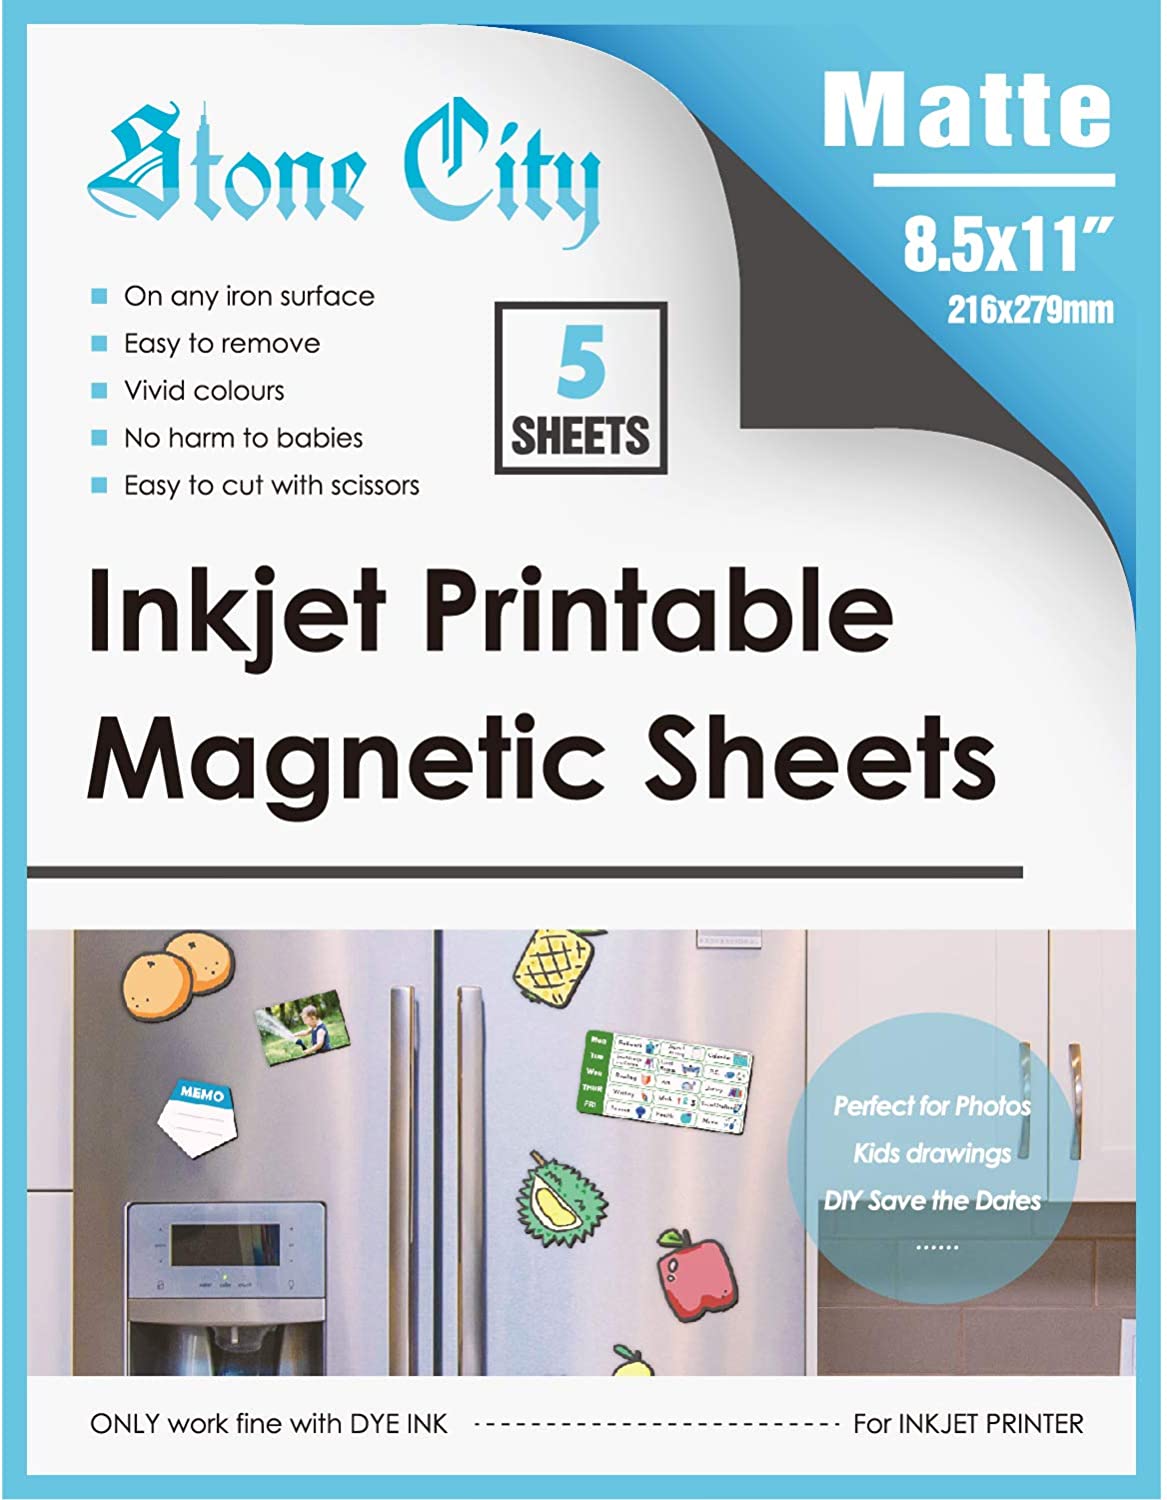 SVG Tuts | Stone City Magnetic Sheets Printable Matte Paper 12mil Thick for Inkjet Printers 8.5x 11 Inches 12 Sheets